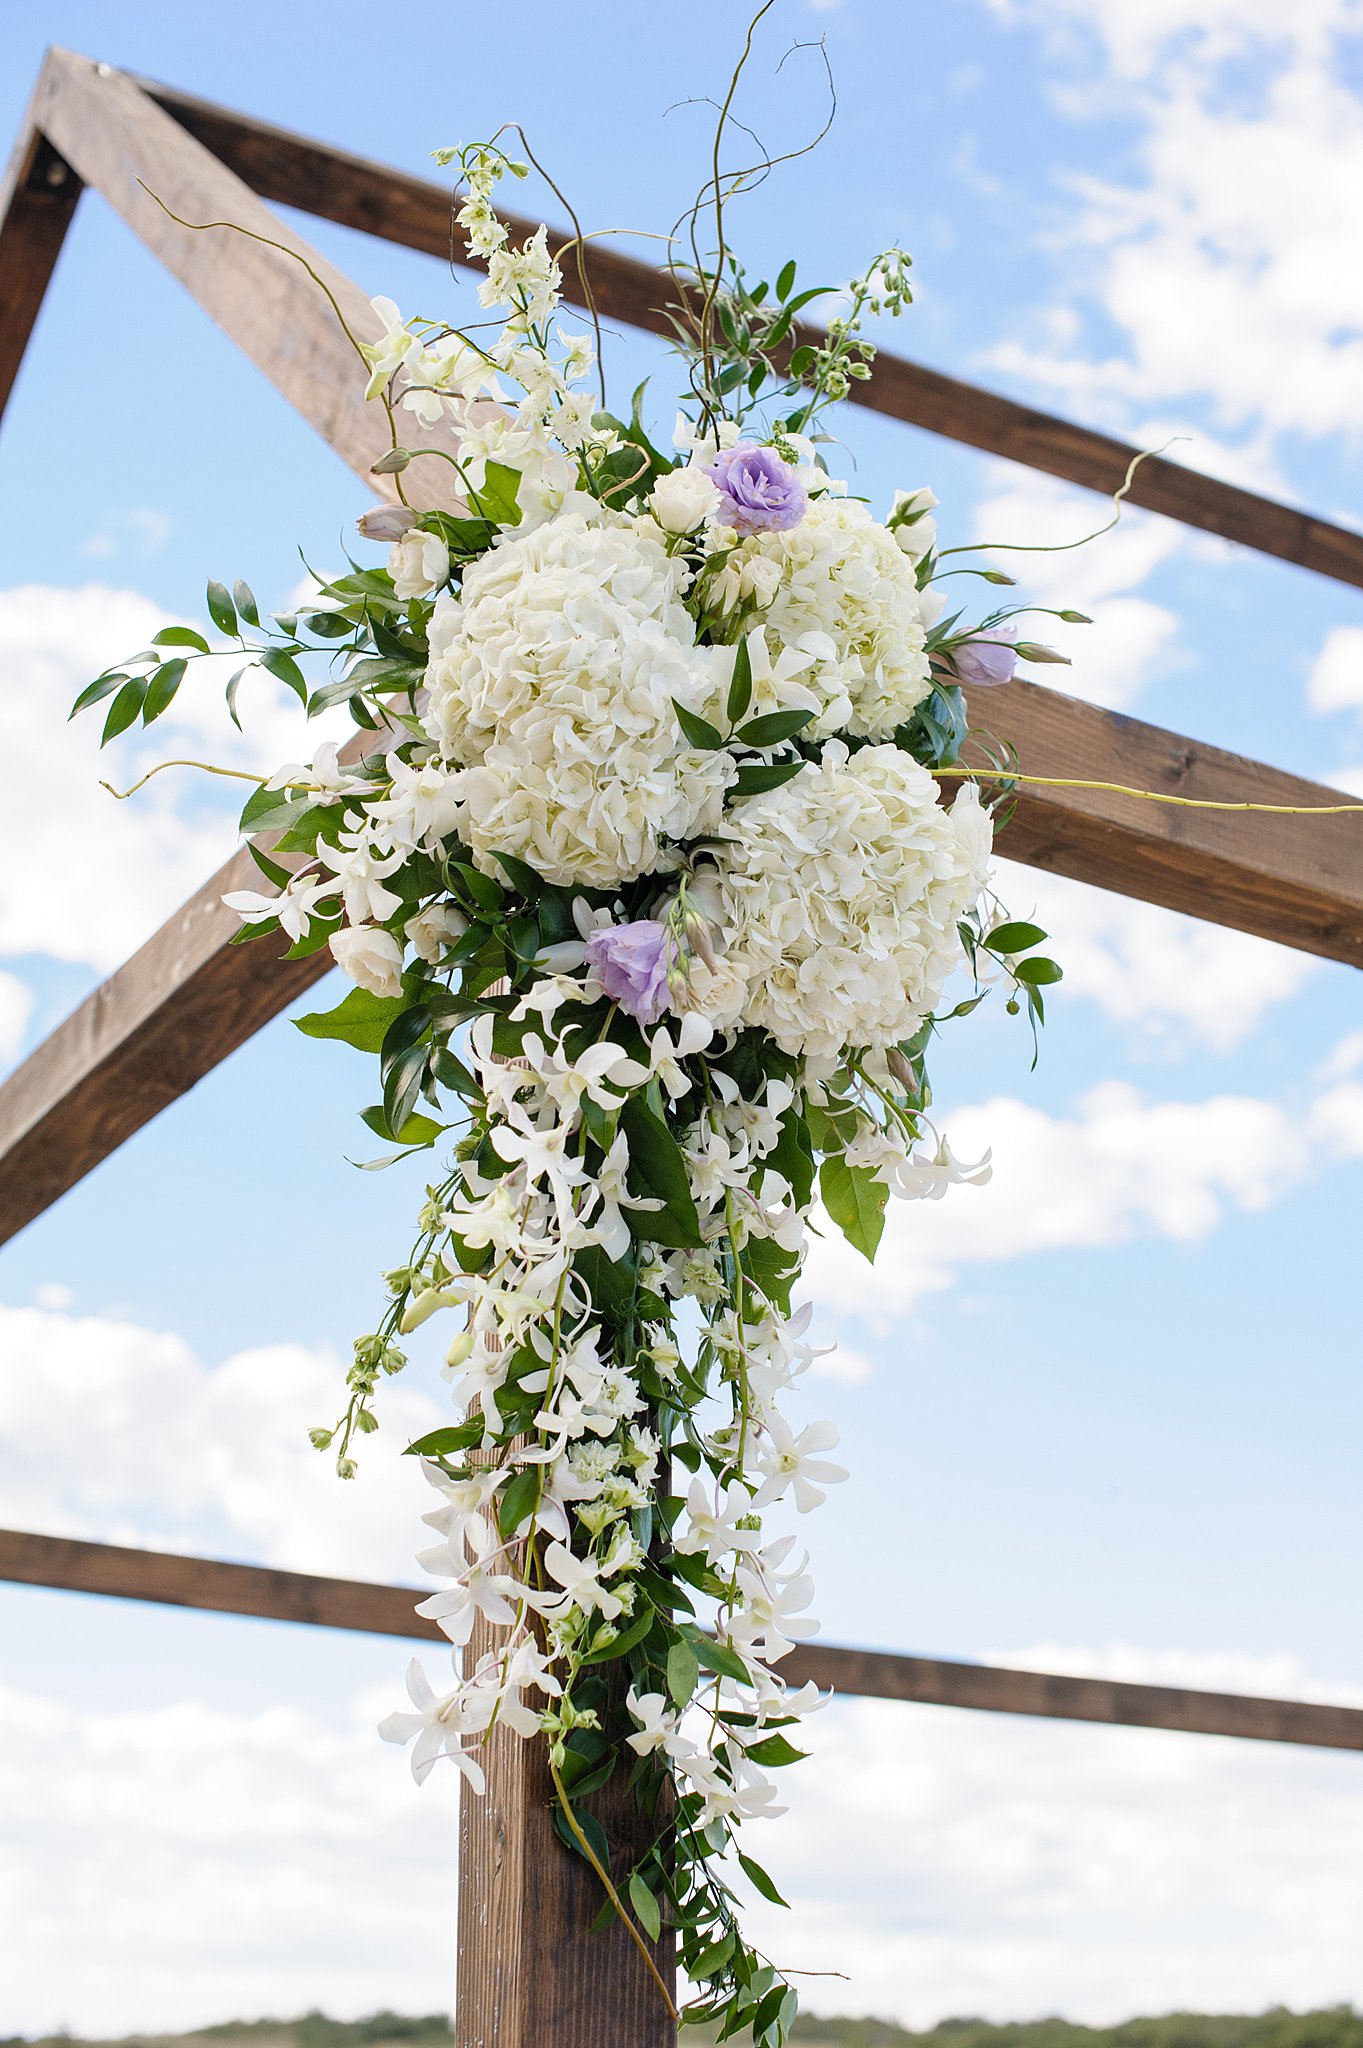 White and purple wedding flower decorations hang on a wooden arbor Colorado springs wedding florists